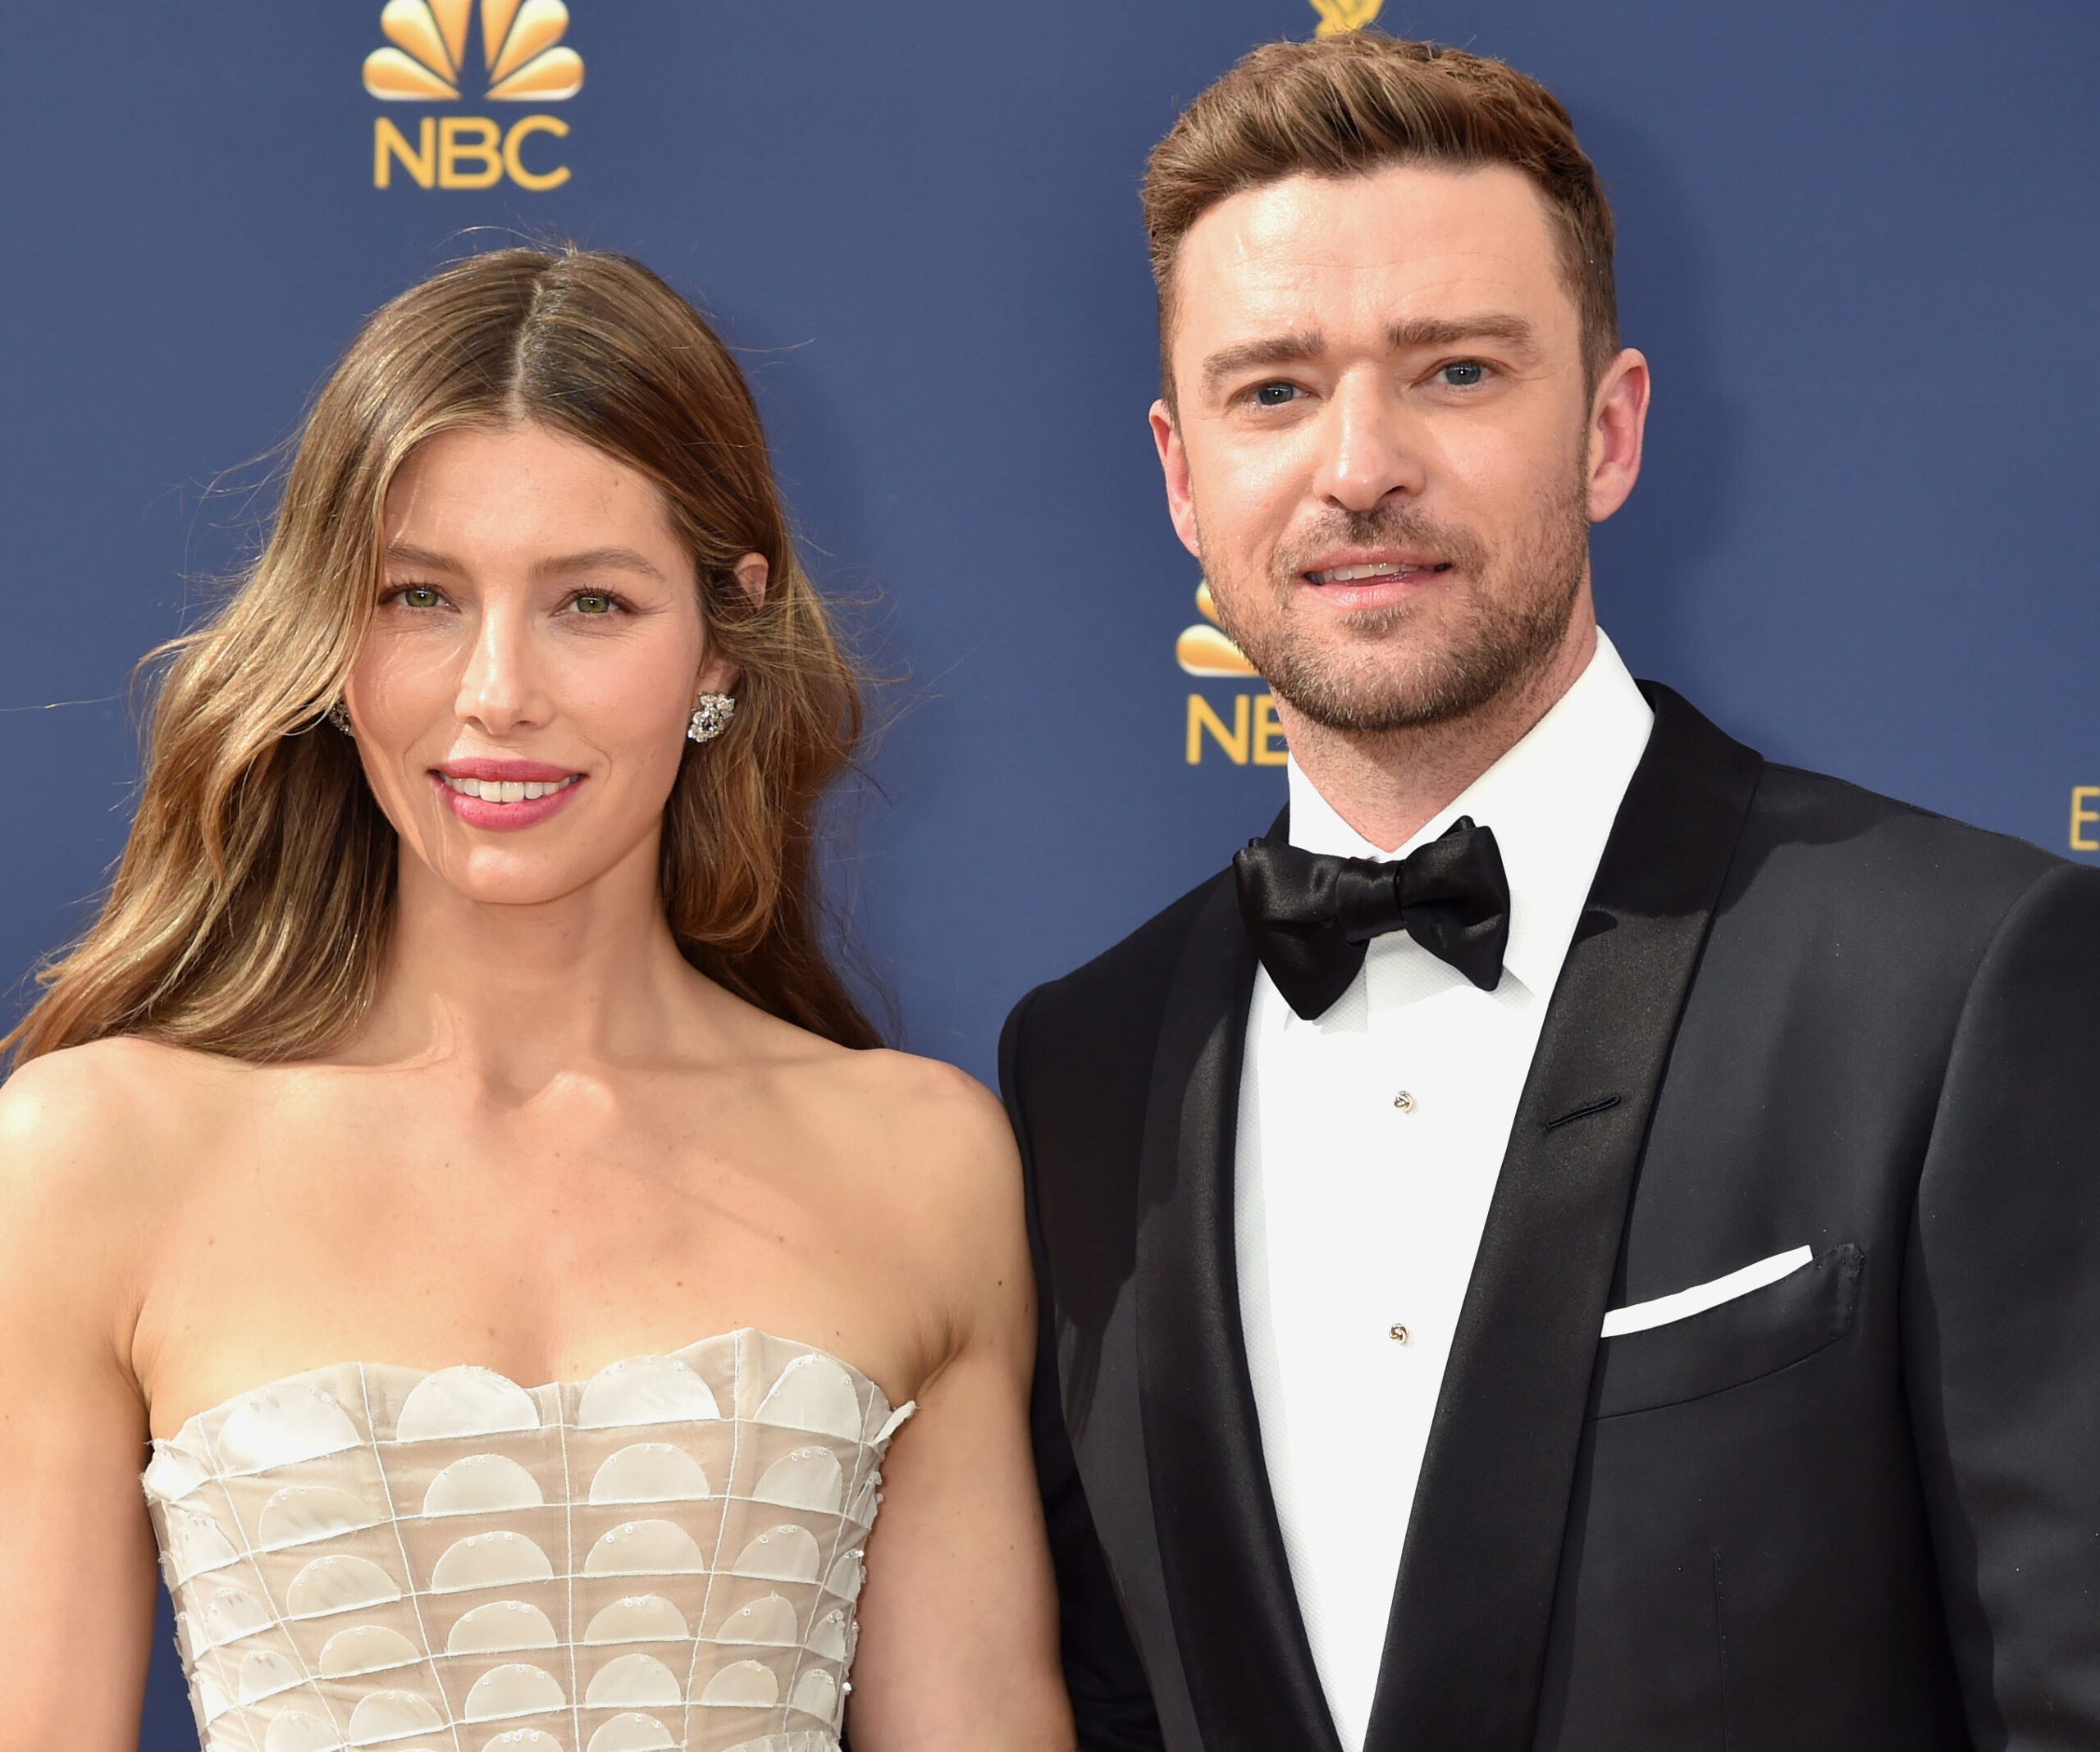 Emmys 2018: Jessica Biel and Justin Timberlake are #couplegoals on the red carpet